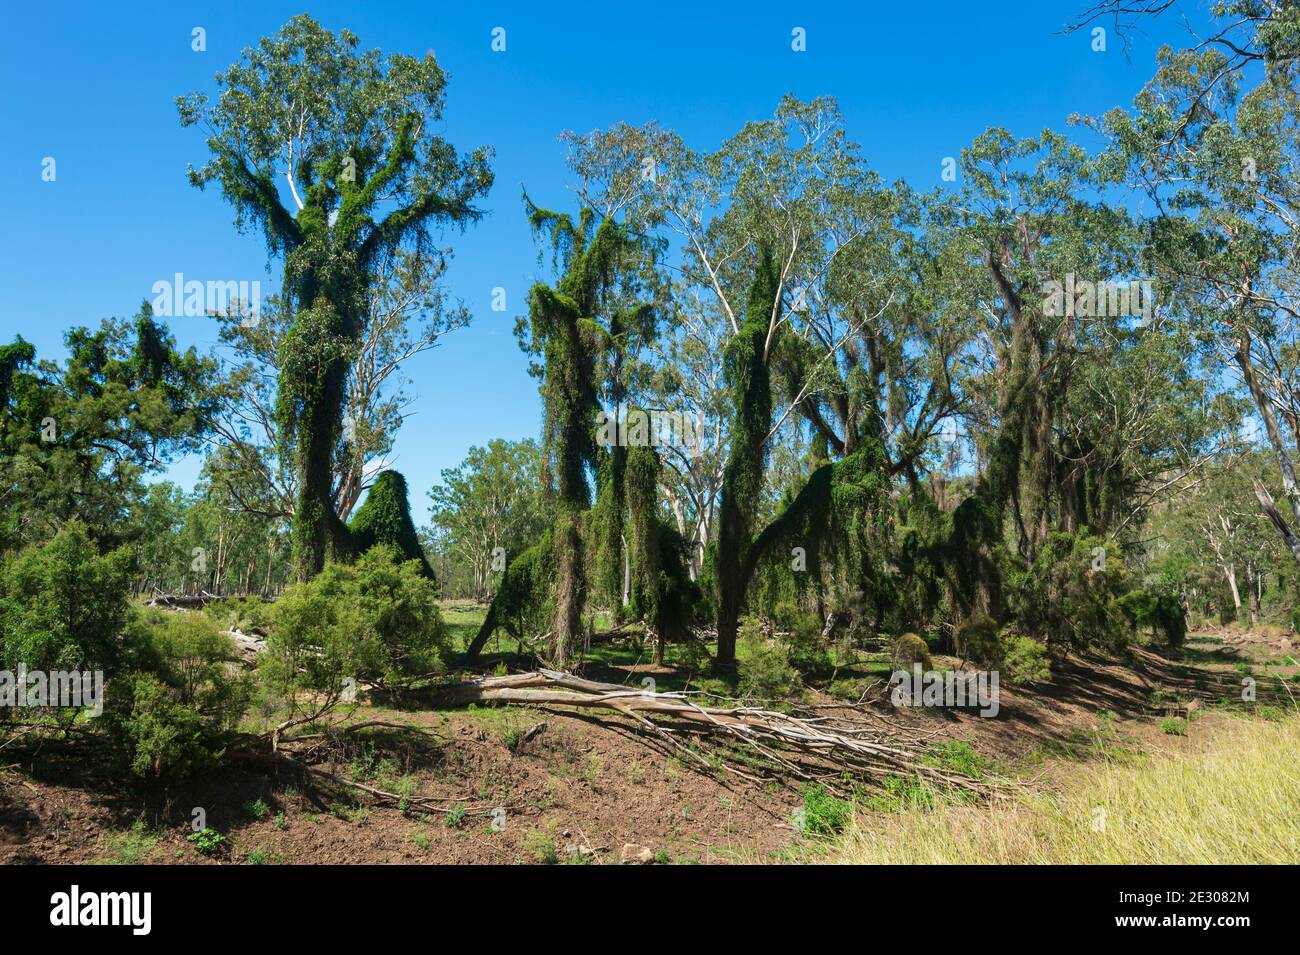 Invasive Weed growing along a dry creek and smothering trees near Biloela, Queensland, QLD, Australia Stock Photo